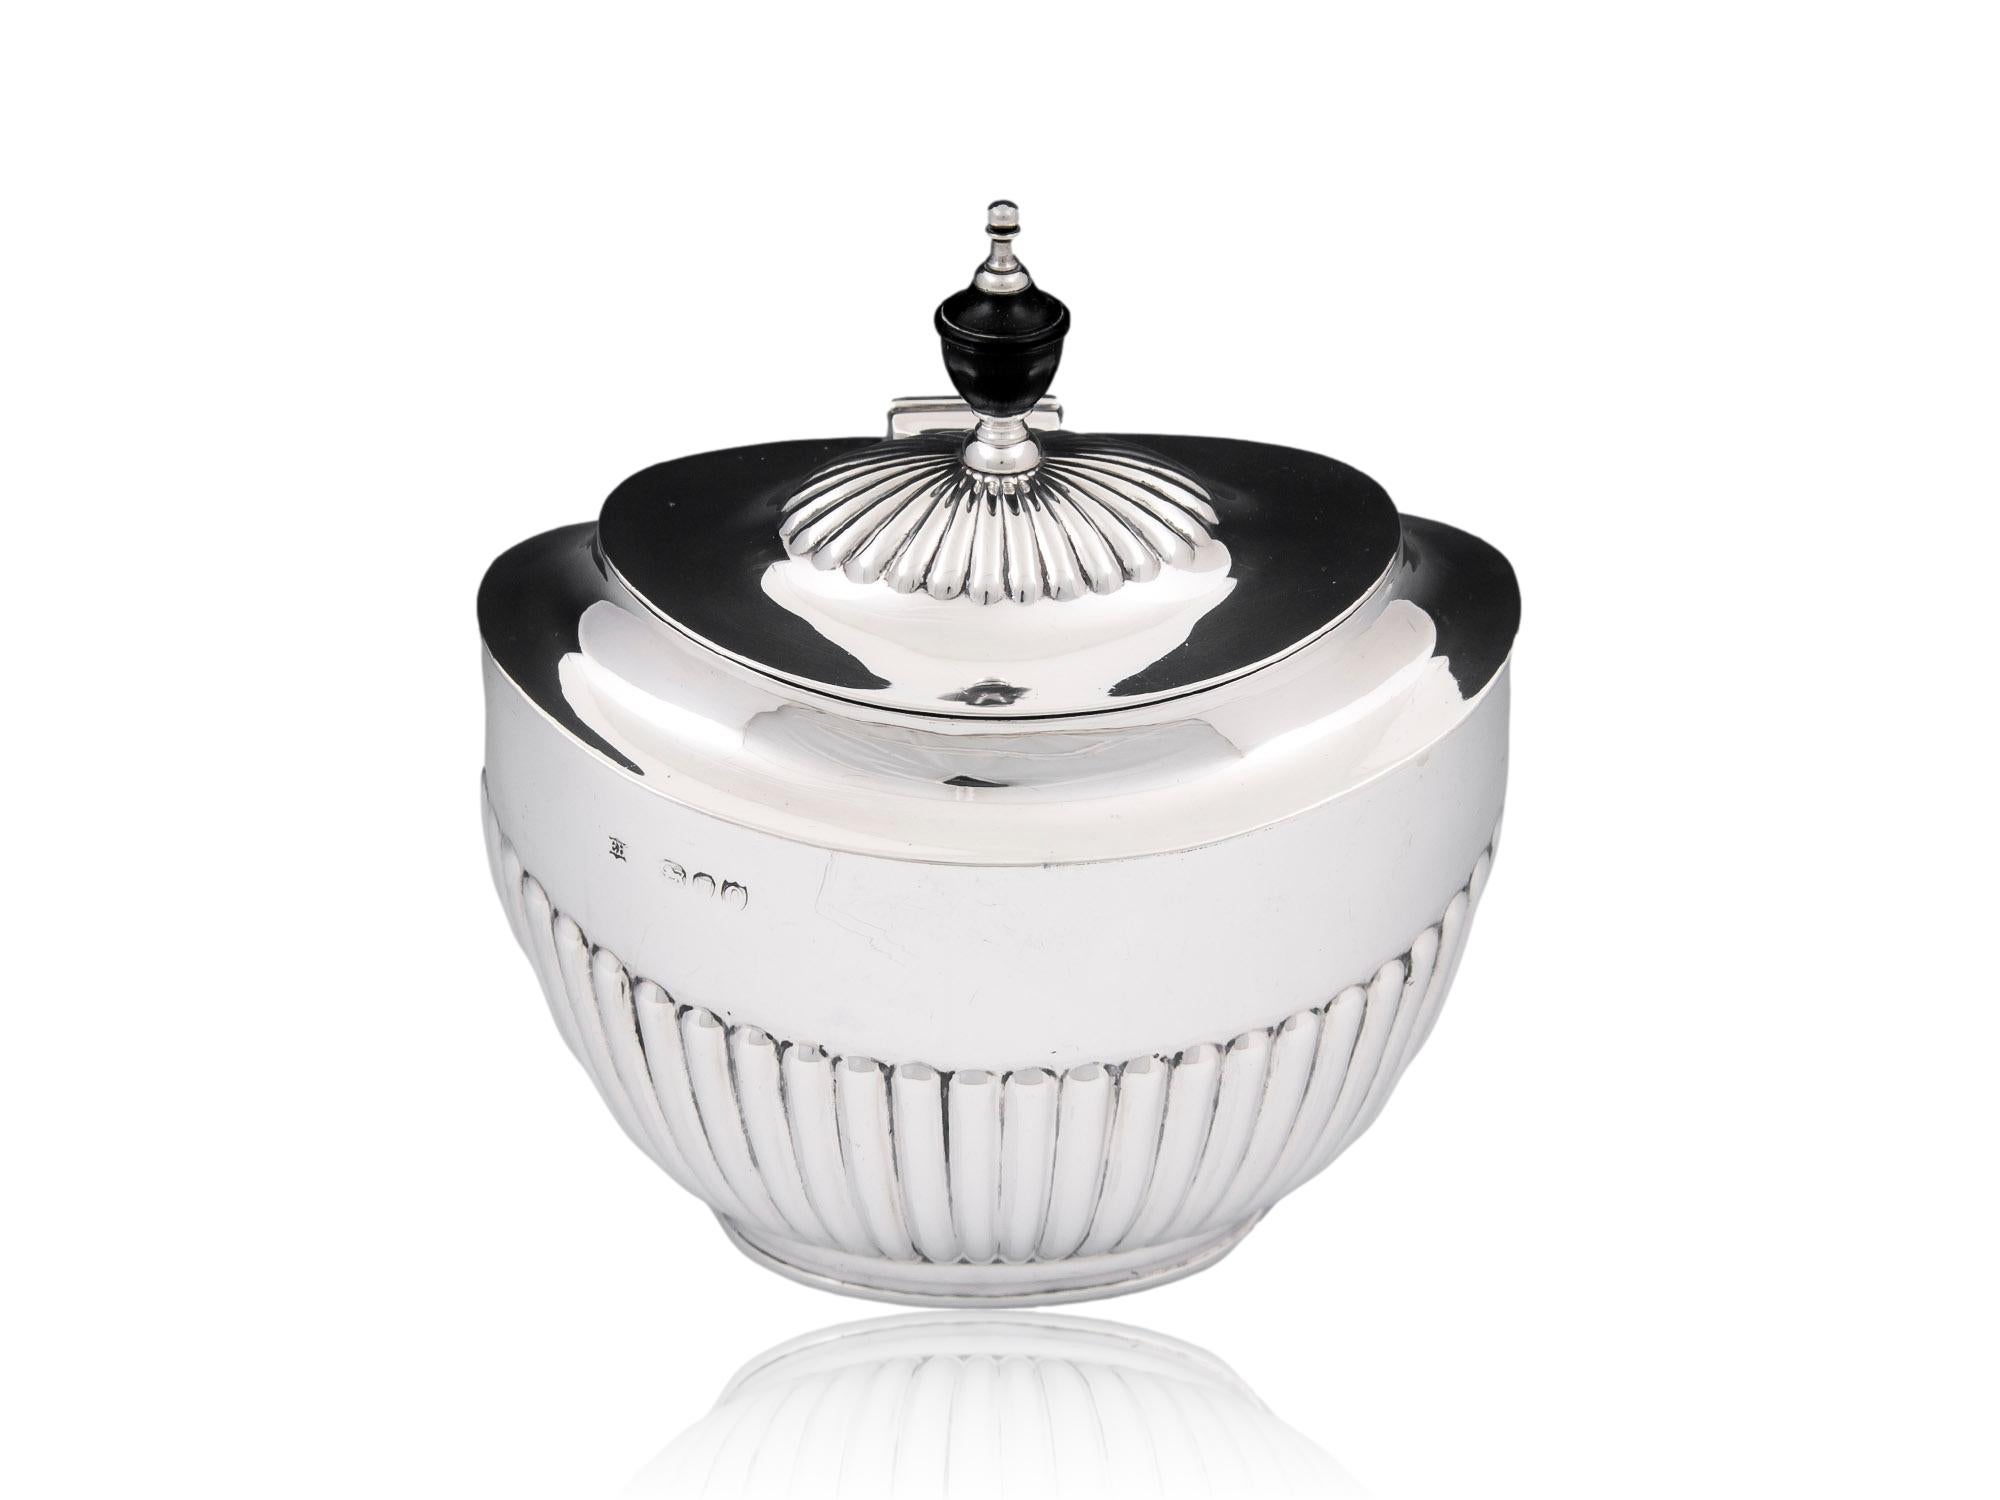 Ebony & Silver Finial 

From our Tea Caddy collection, we are pleased to offer a Victorian Silver Tea Caddy. The Silver Tea Caddy of unusual oval shape with a gadrooned ribbed exterior and stepped lid surmounted by an Ebony and Silver finial. The